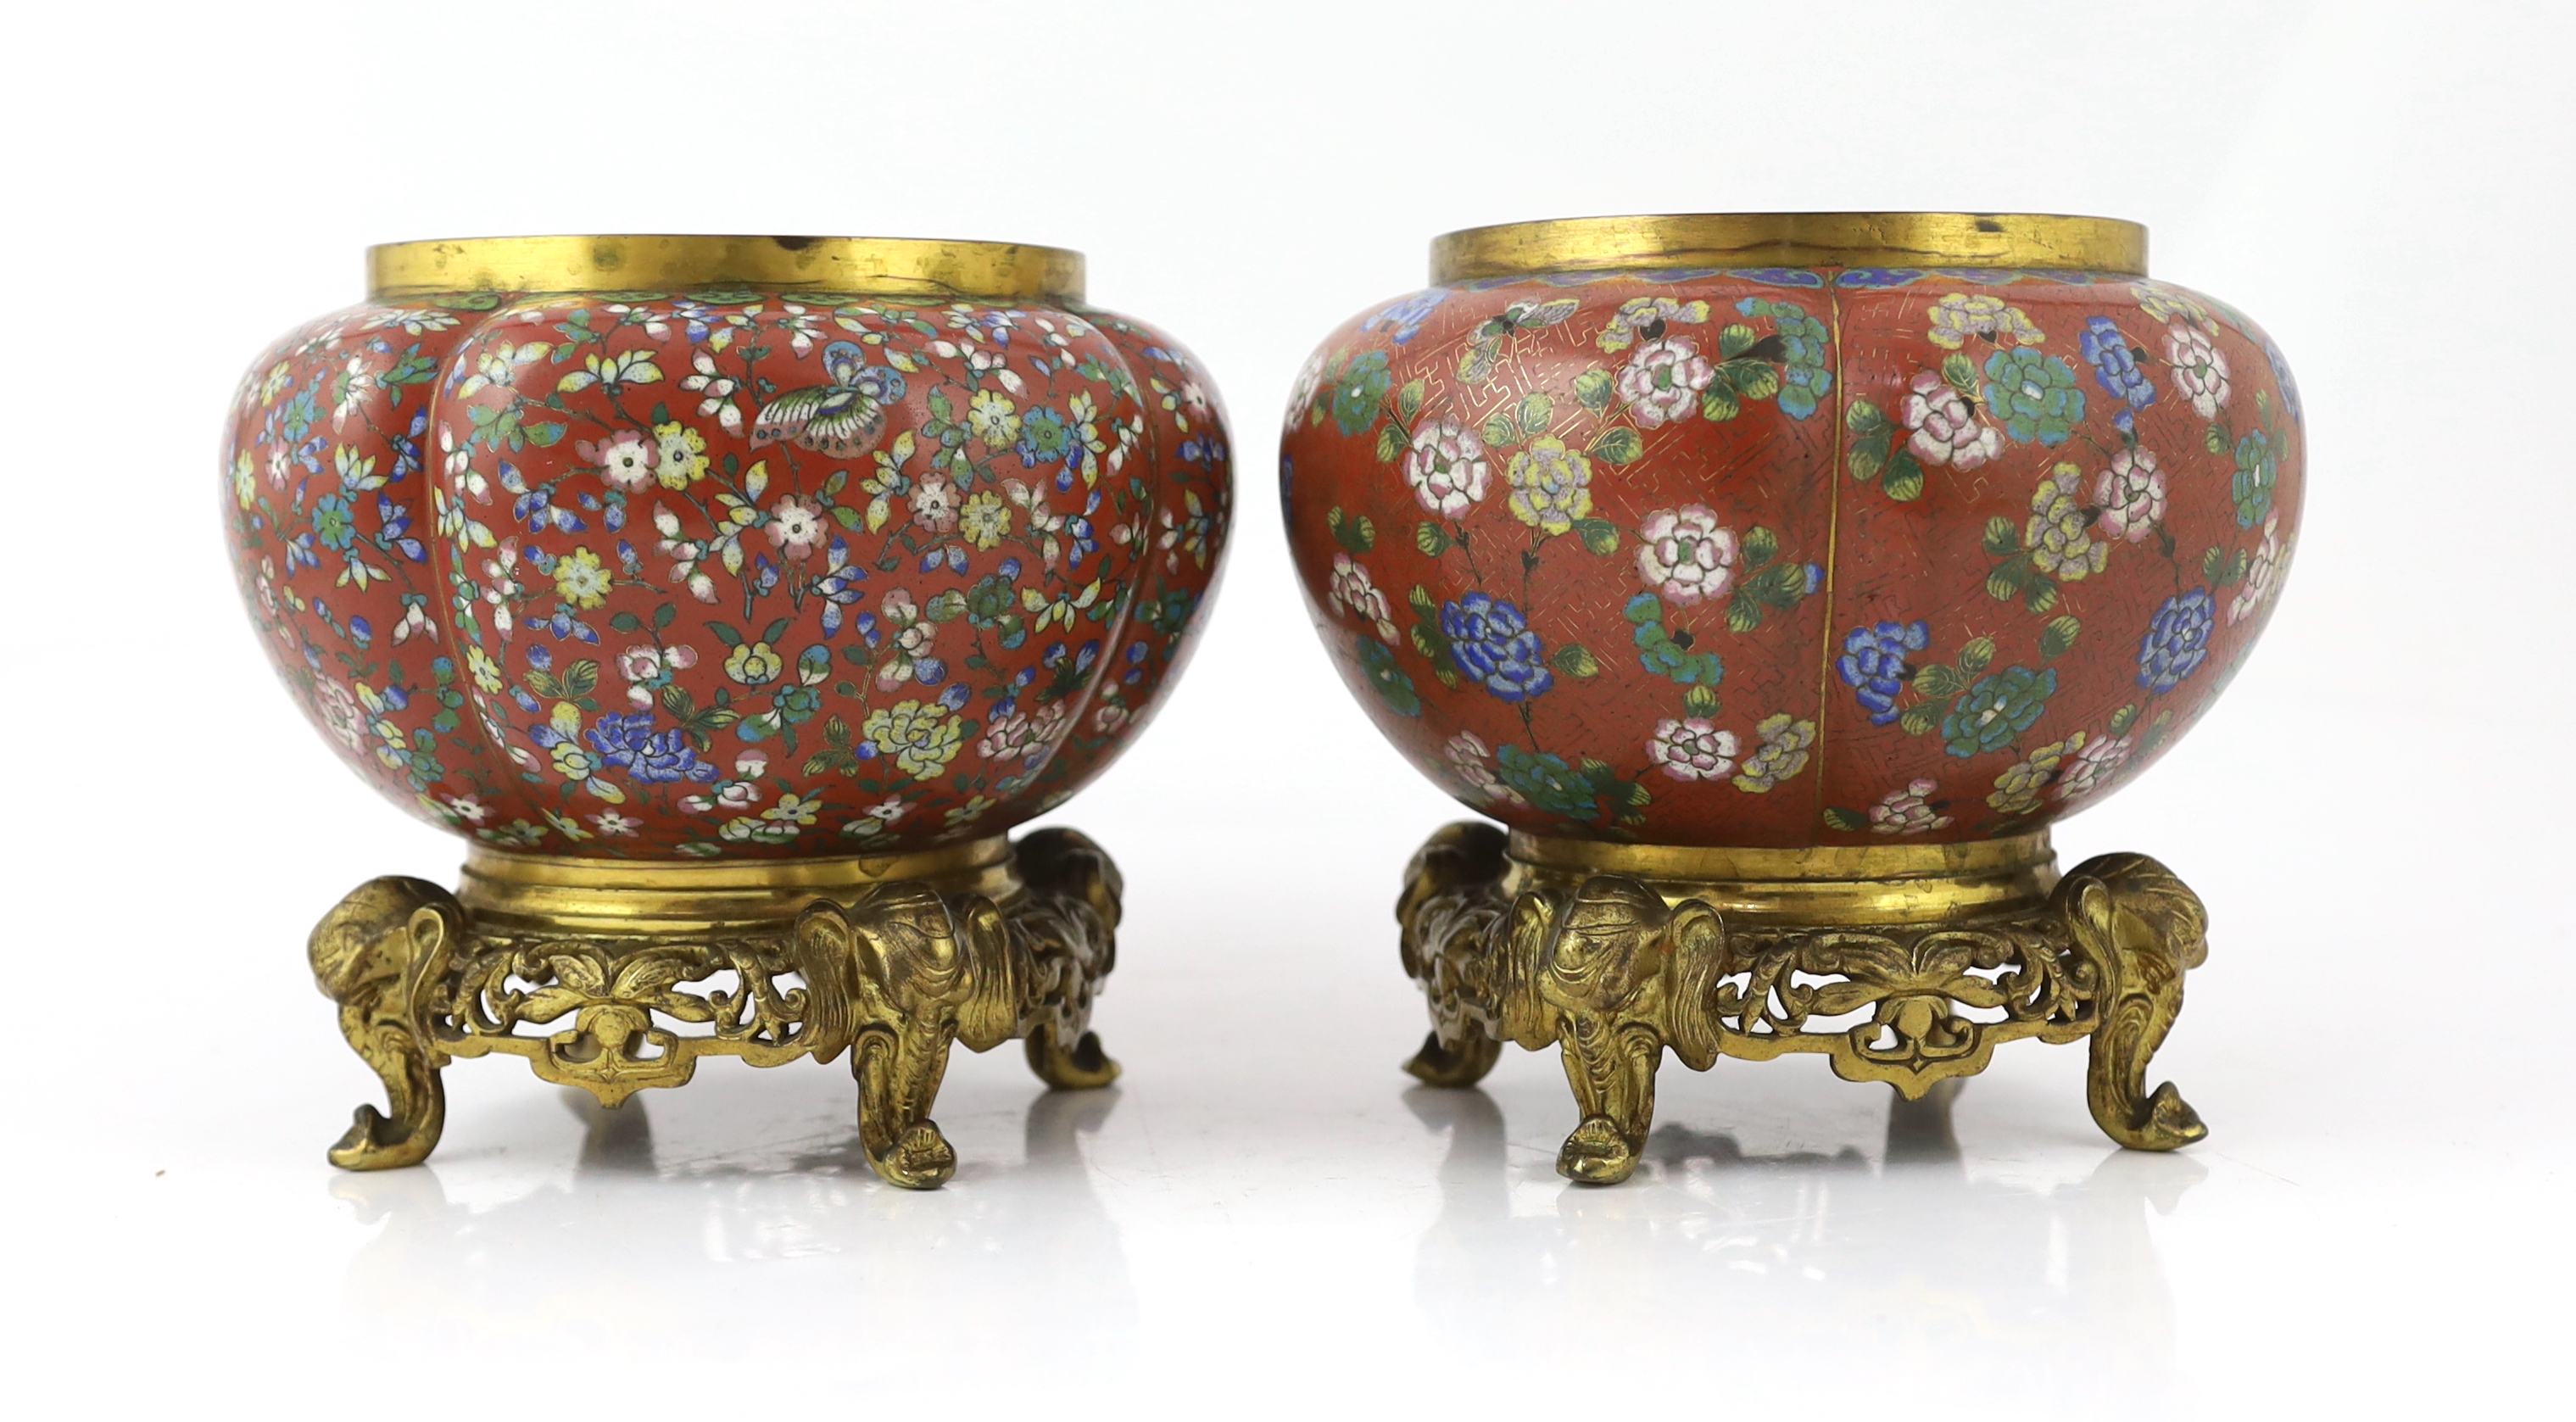 A near pair of Chinese cloisonné enamel and gilt bronze jardinieres, 19th century